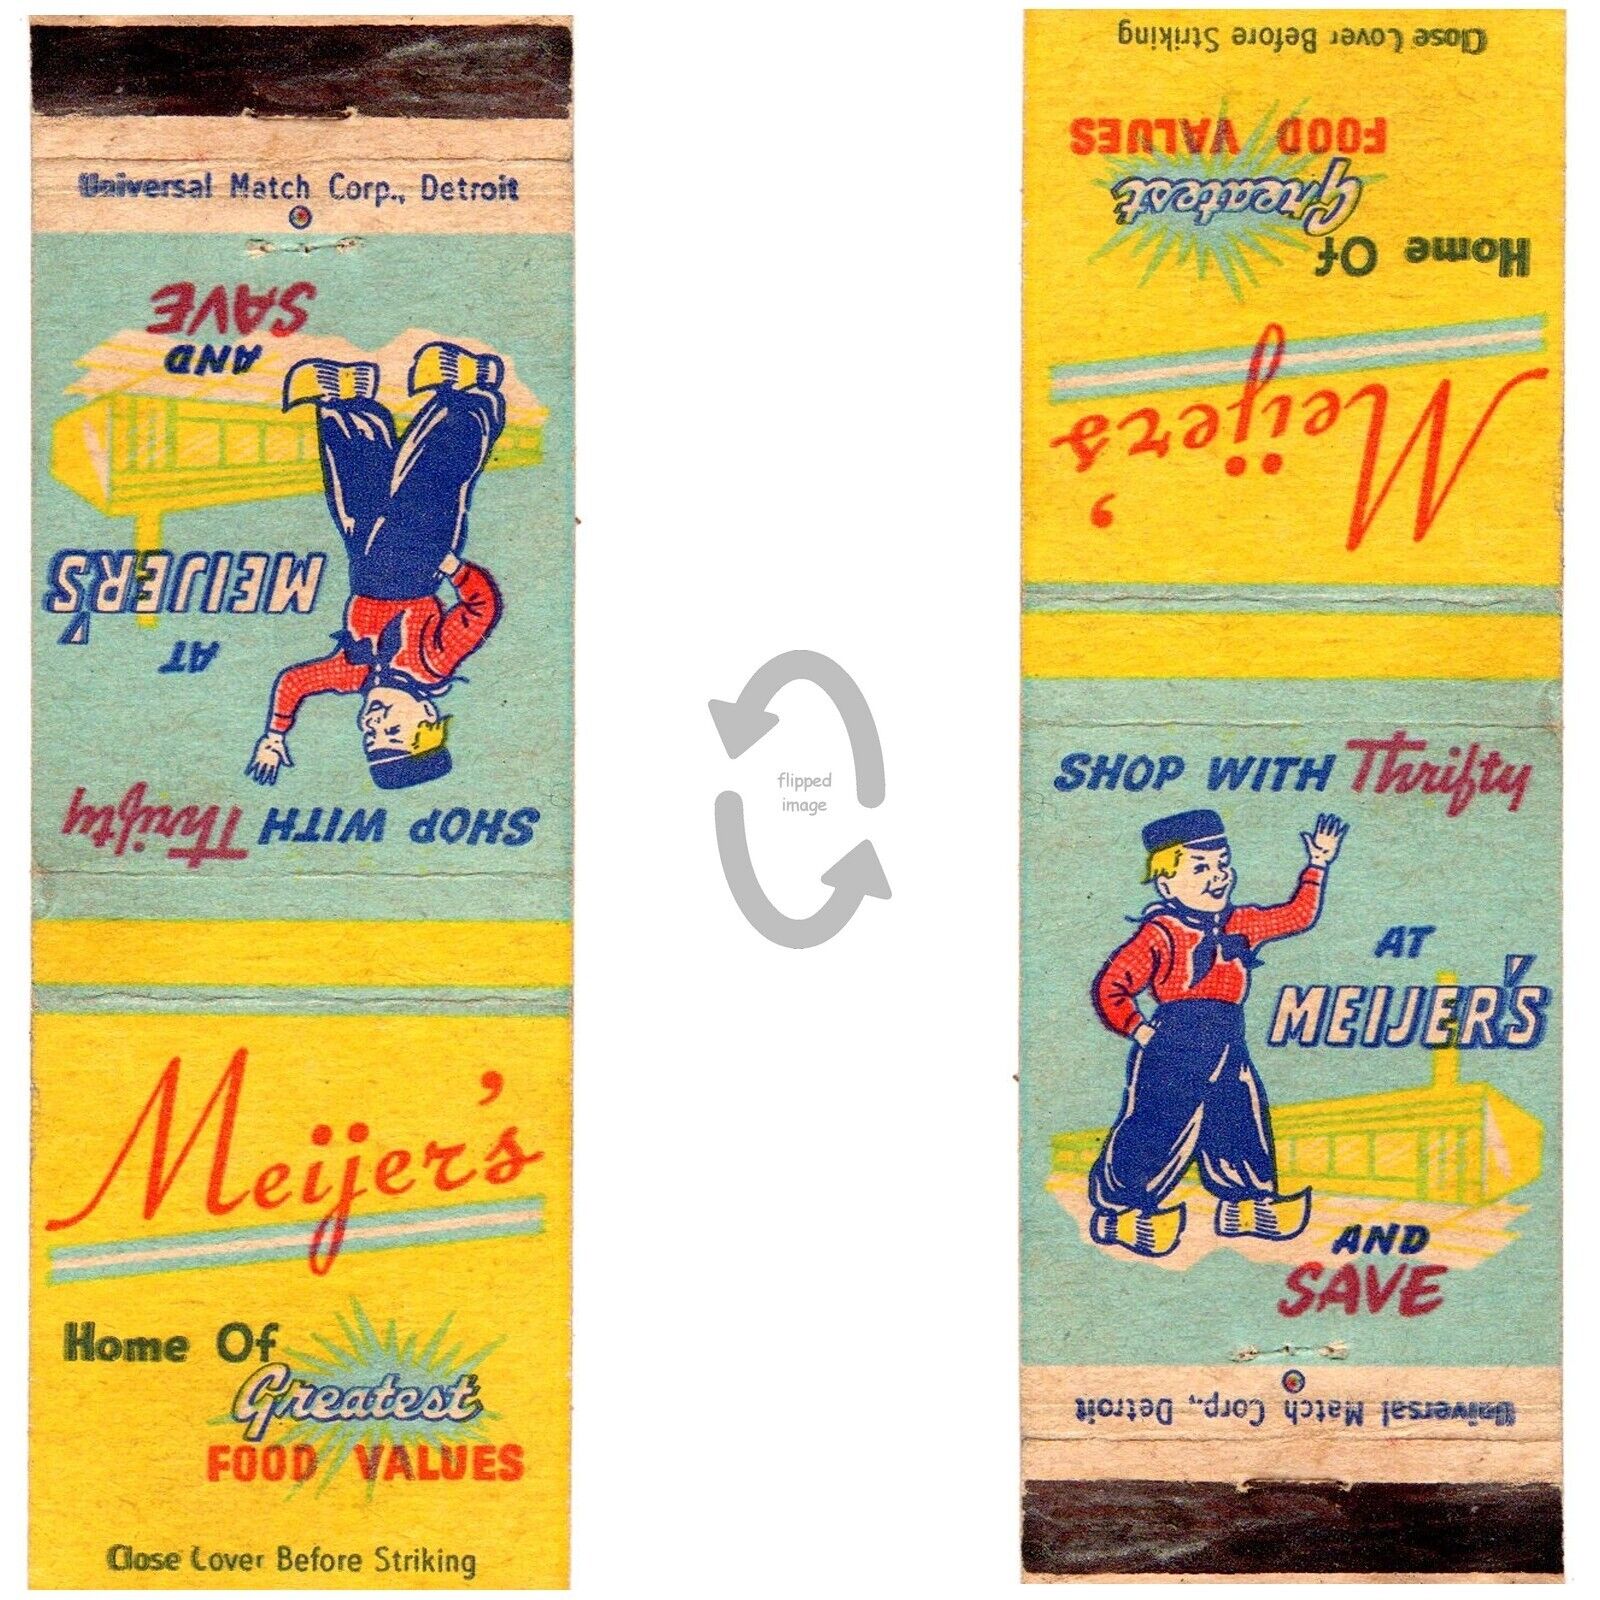 Vintage Matchbook Cover Meijer\'s Grocery store Dutch boy 1950s Michigan